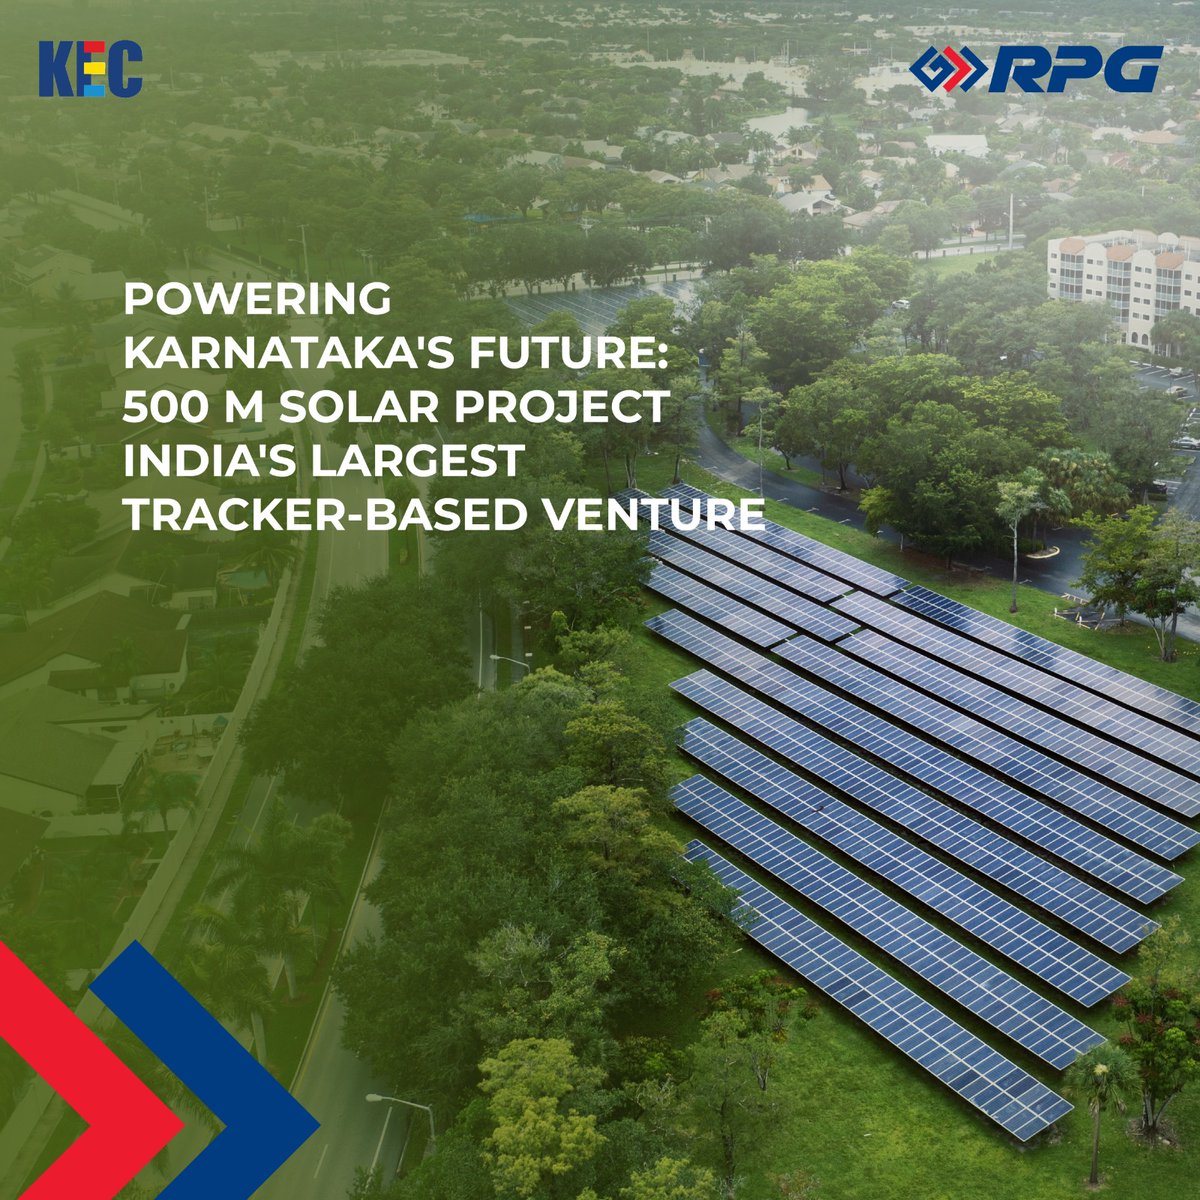 Shaping tomorrow's energy landscape, KEC leads the way with solar innovation. #ThisIsRPG #KEC #SolarInnovation